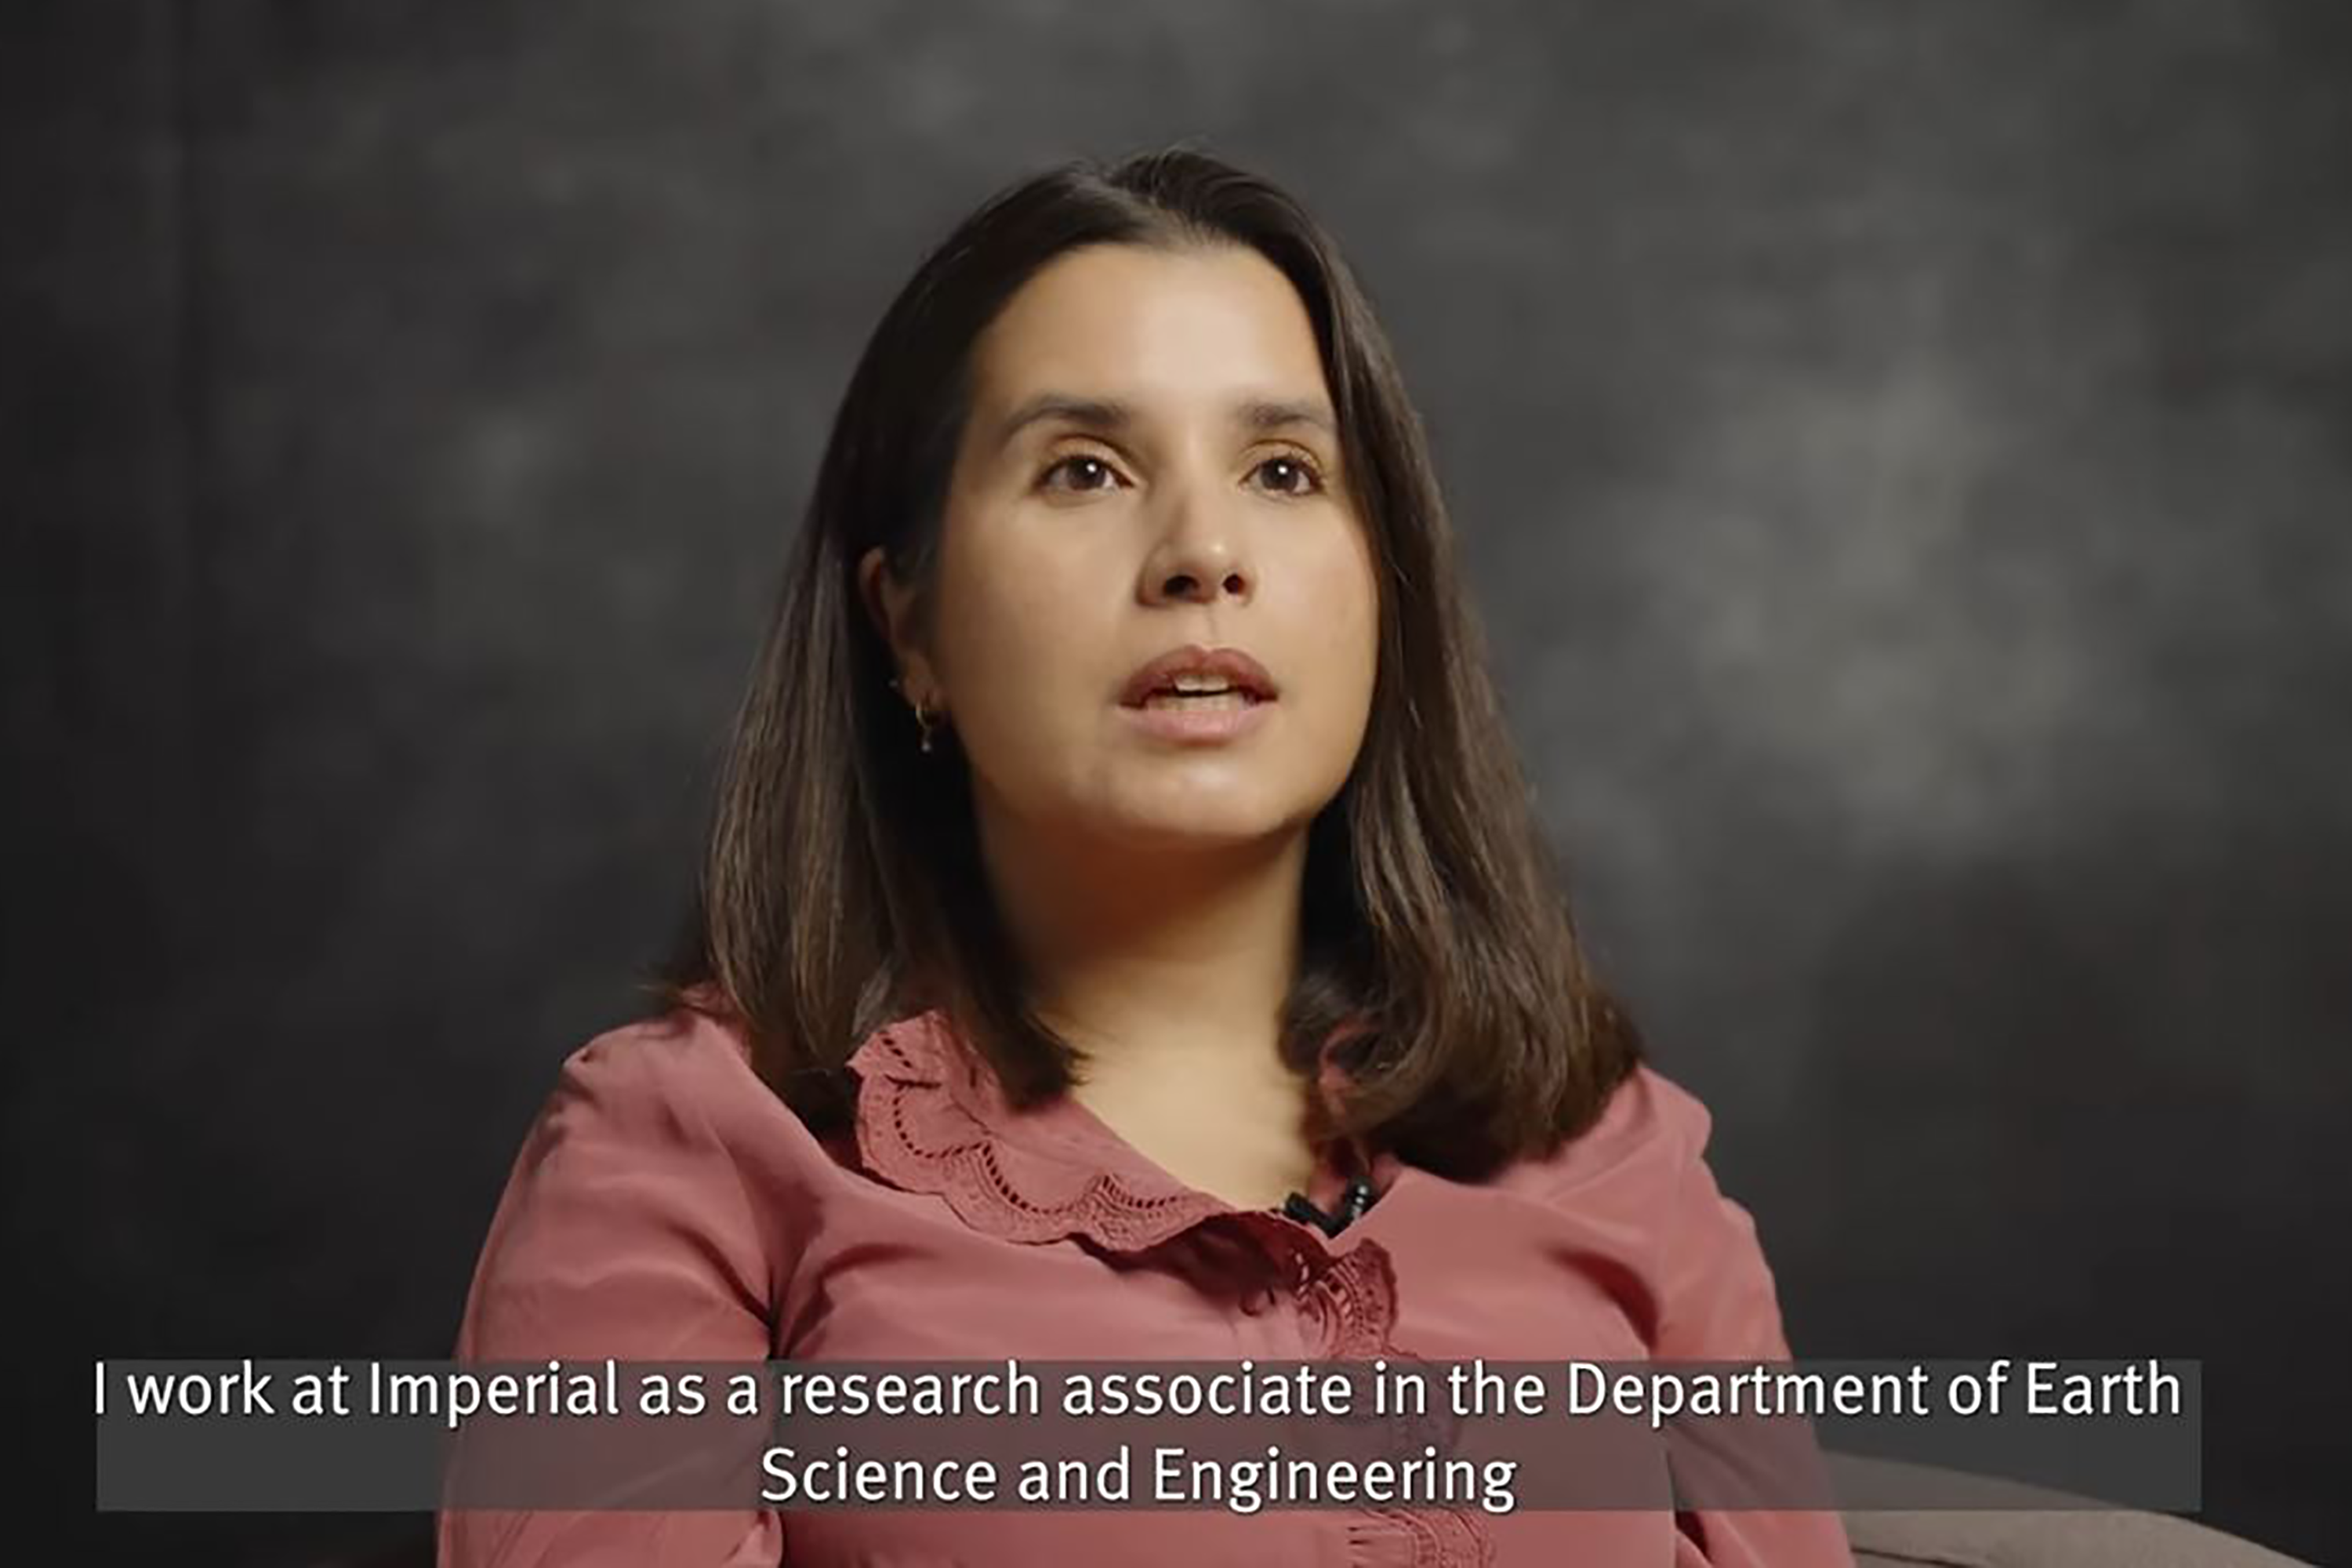 Meet our researchers in this introductory video